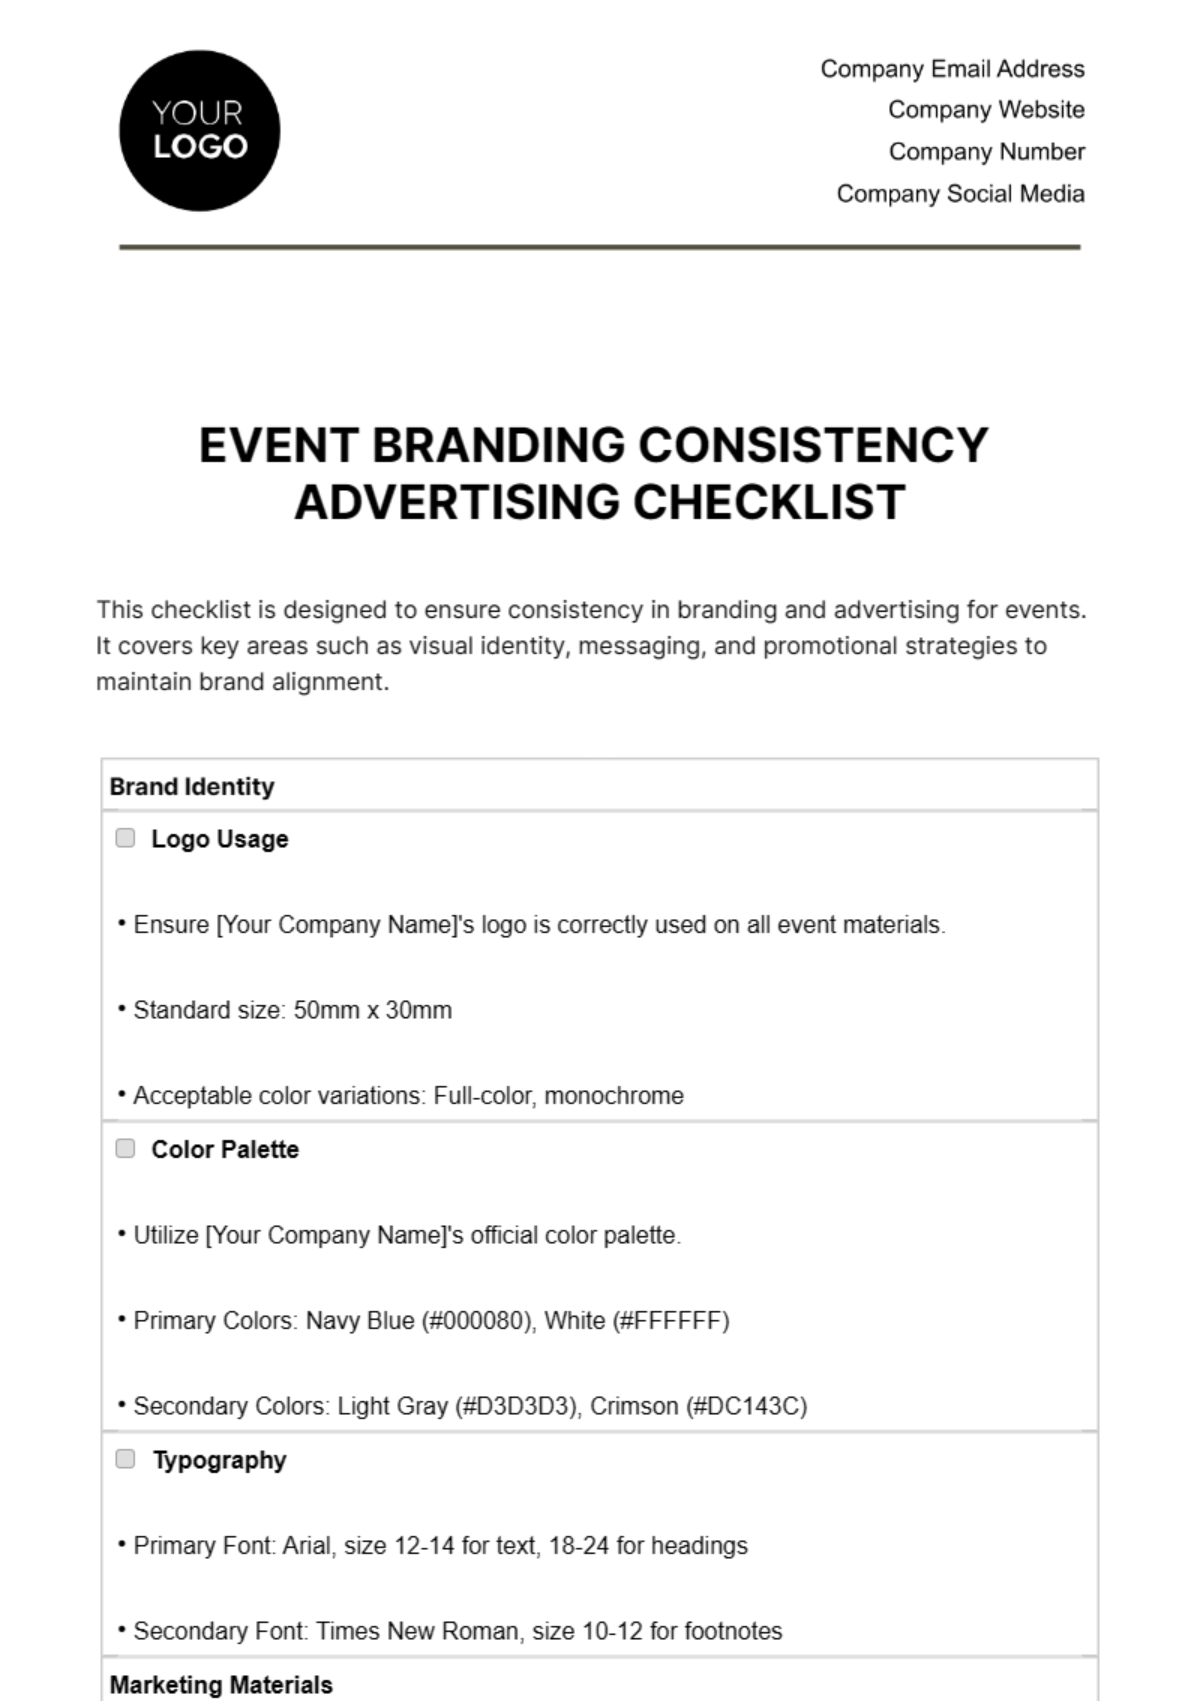 Free Event Branding Consistency Advertising Checklist Template